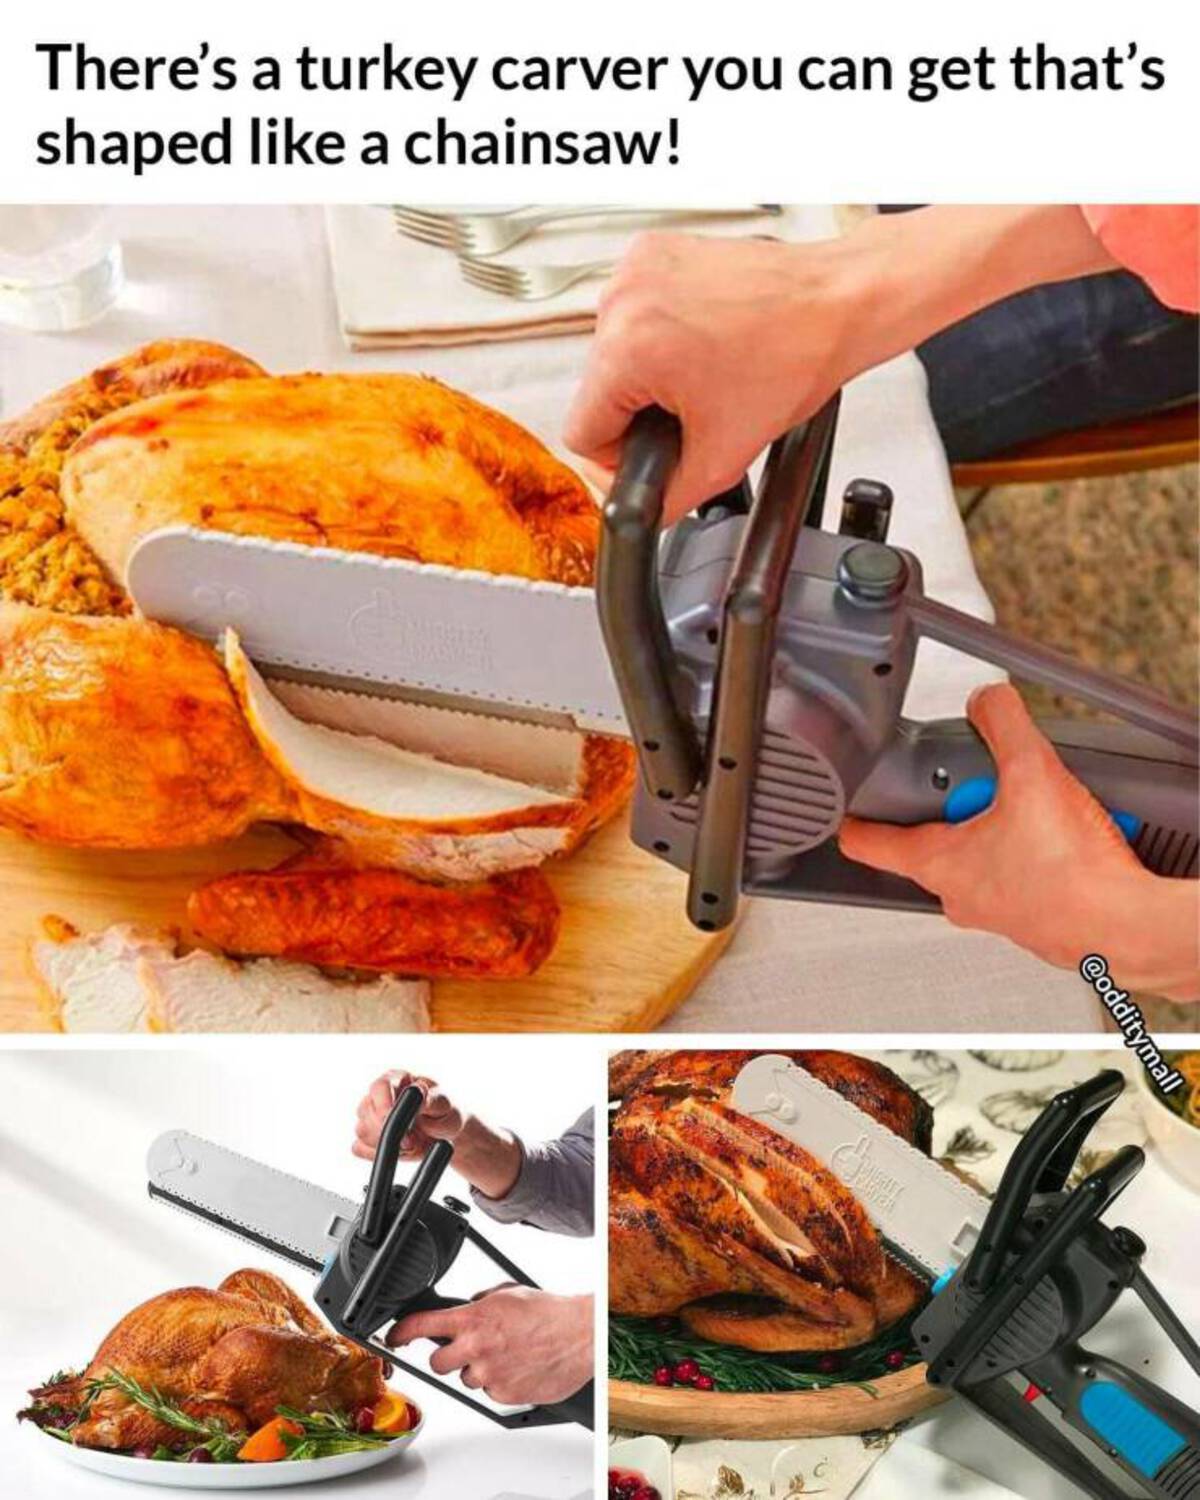 turkey carving chainsaw - There's a turkey carver you can get that's shaped a chainsaw! Carter